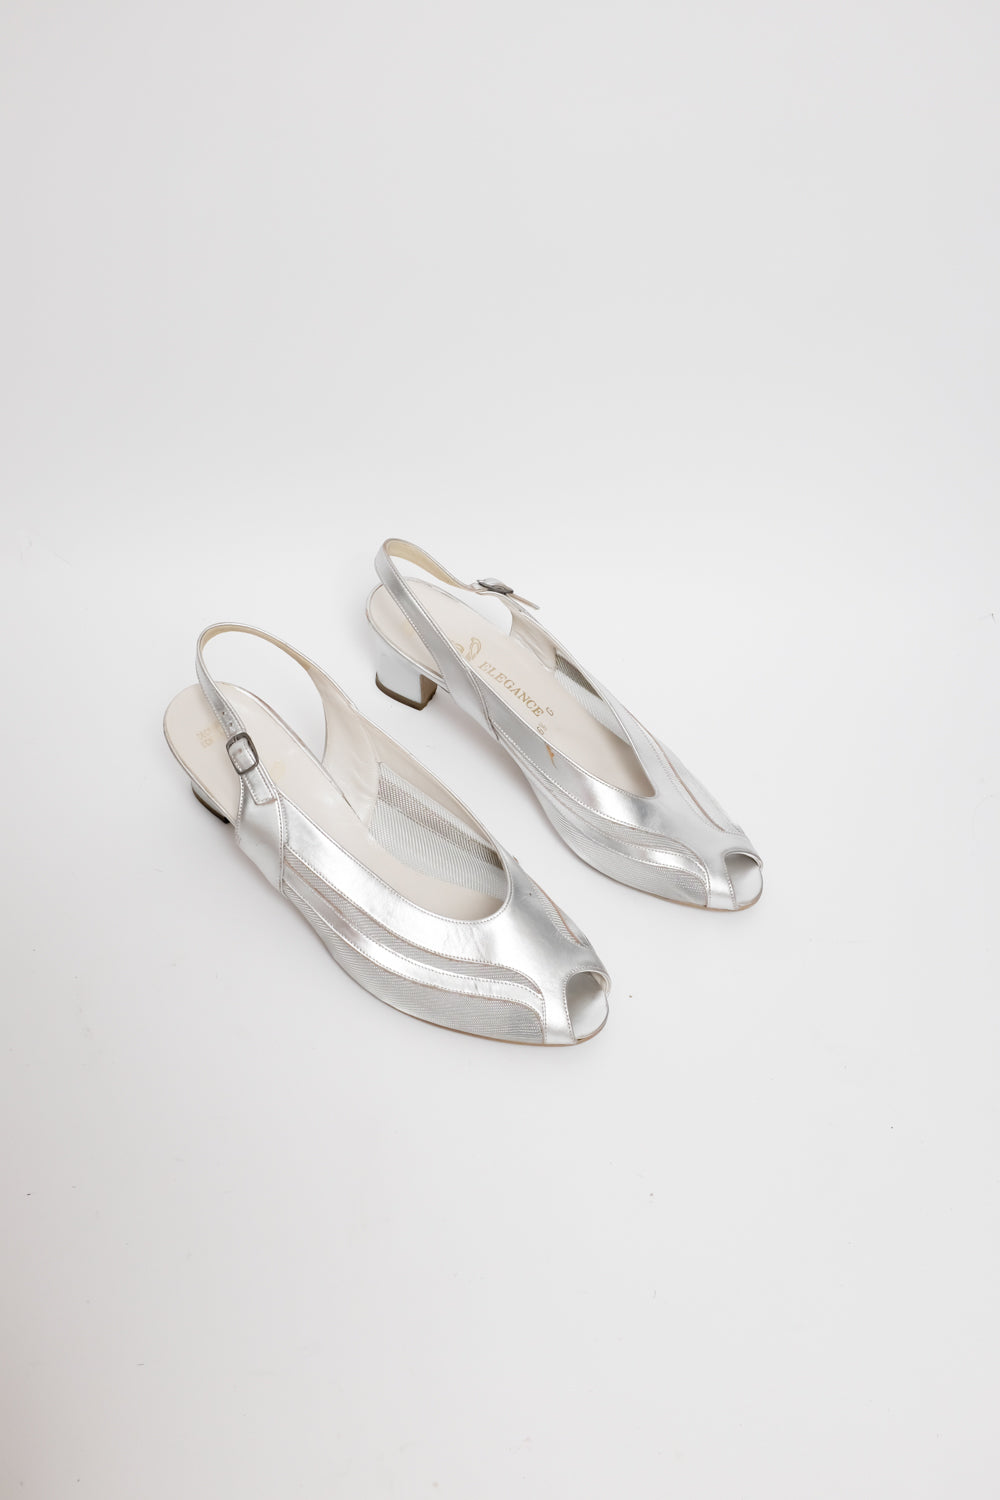 LUCID SILVER LEATHER 39 40 SANDALS